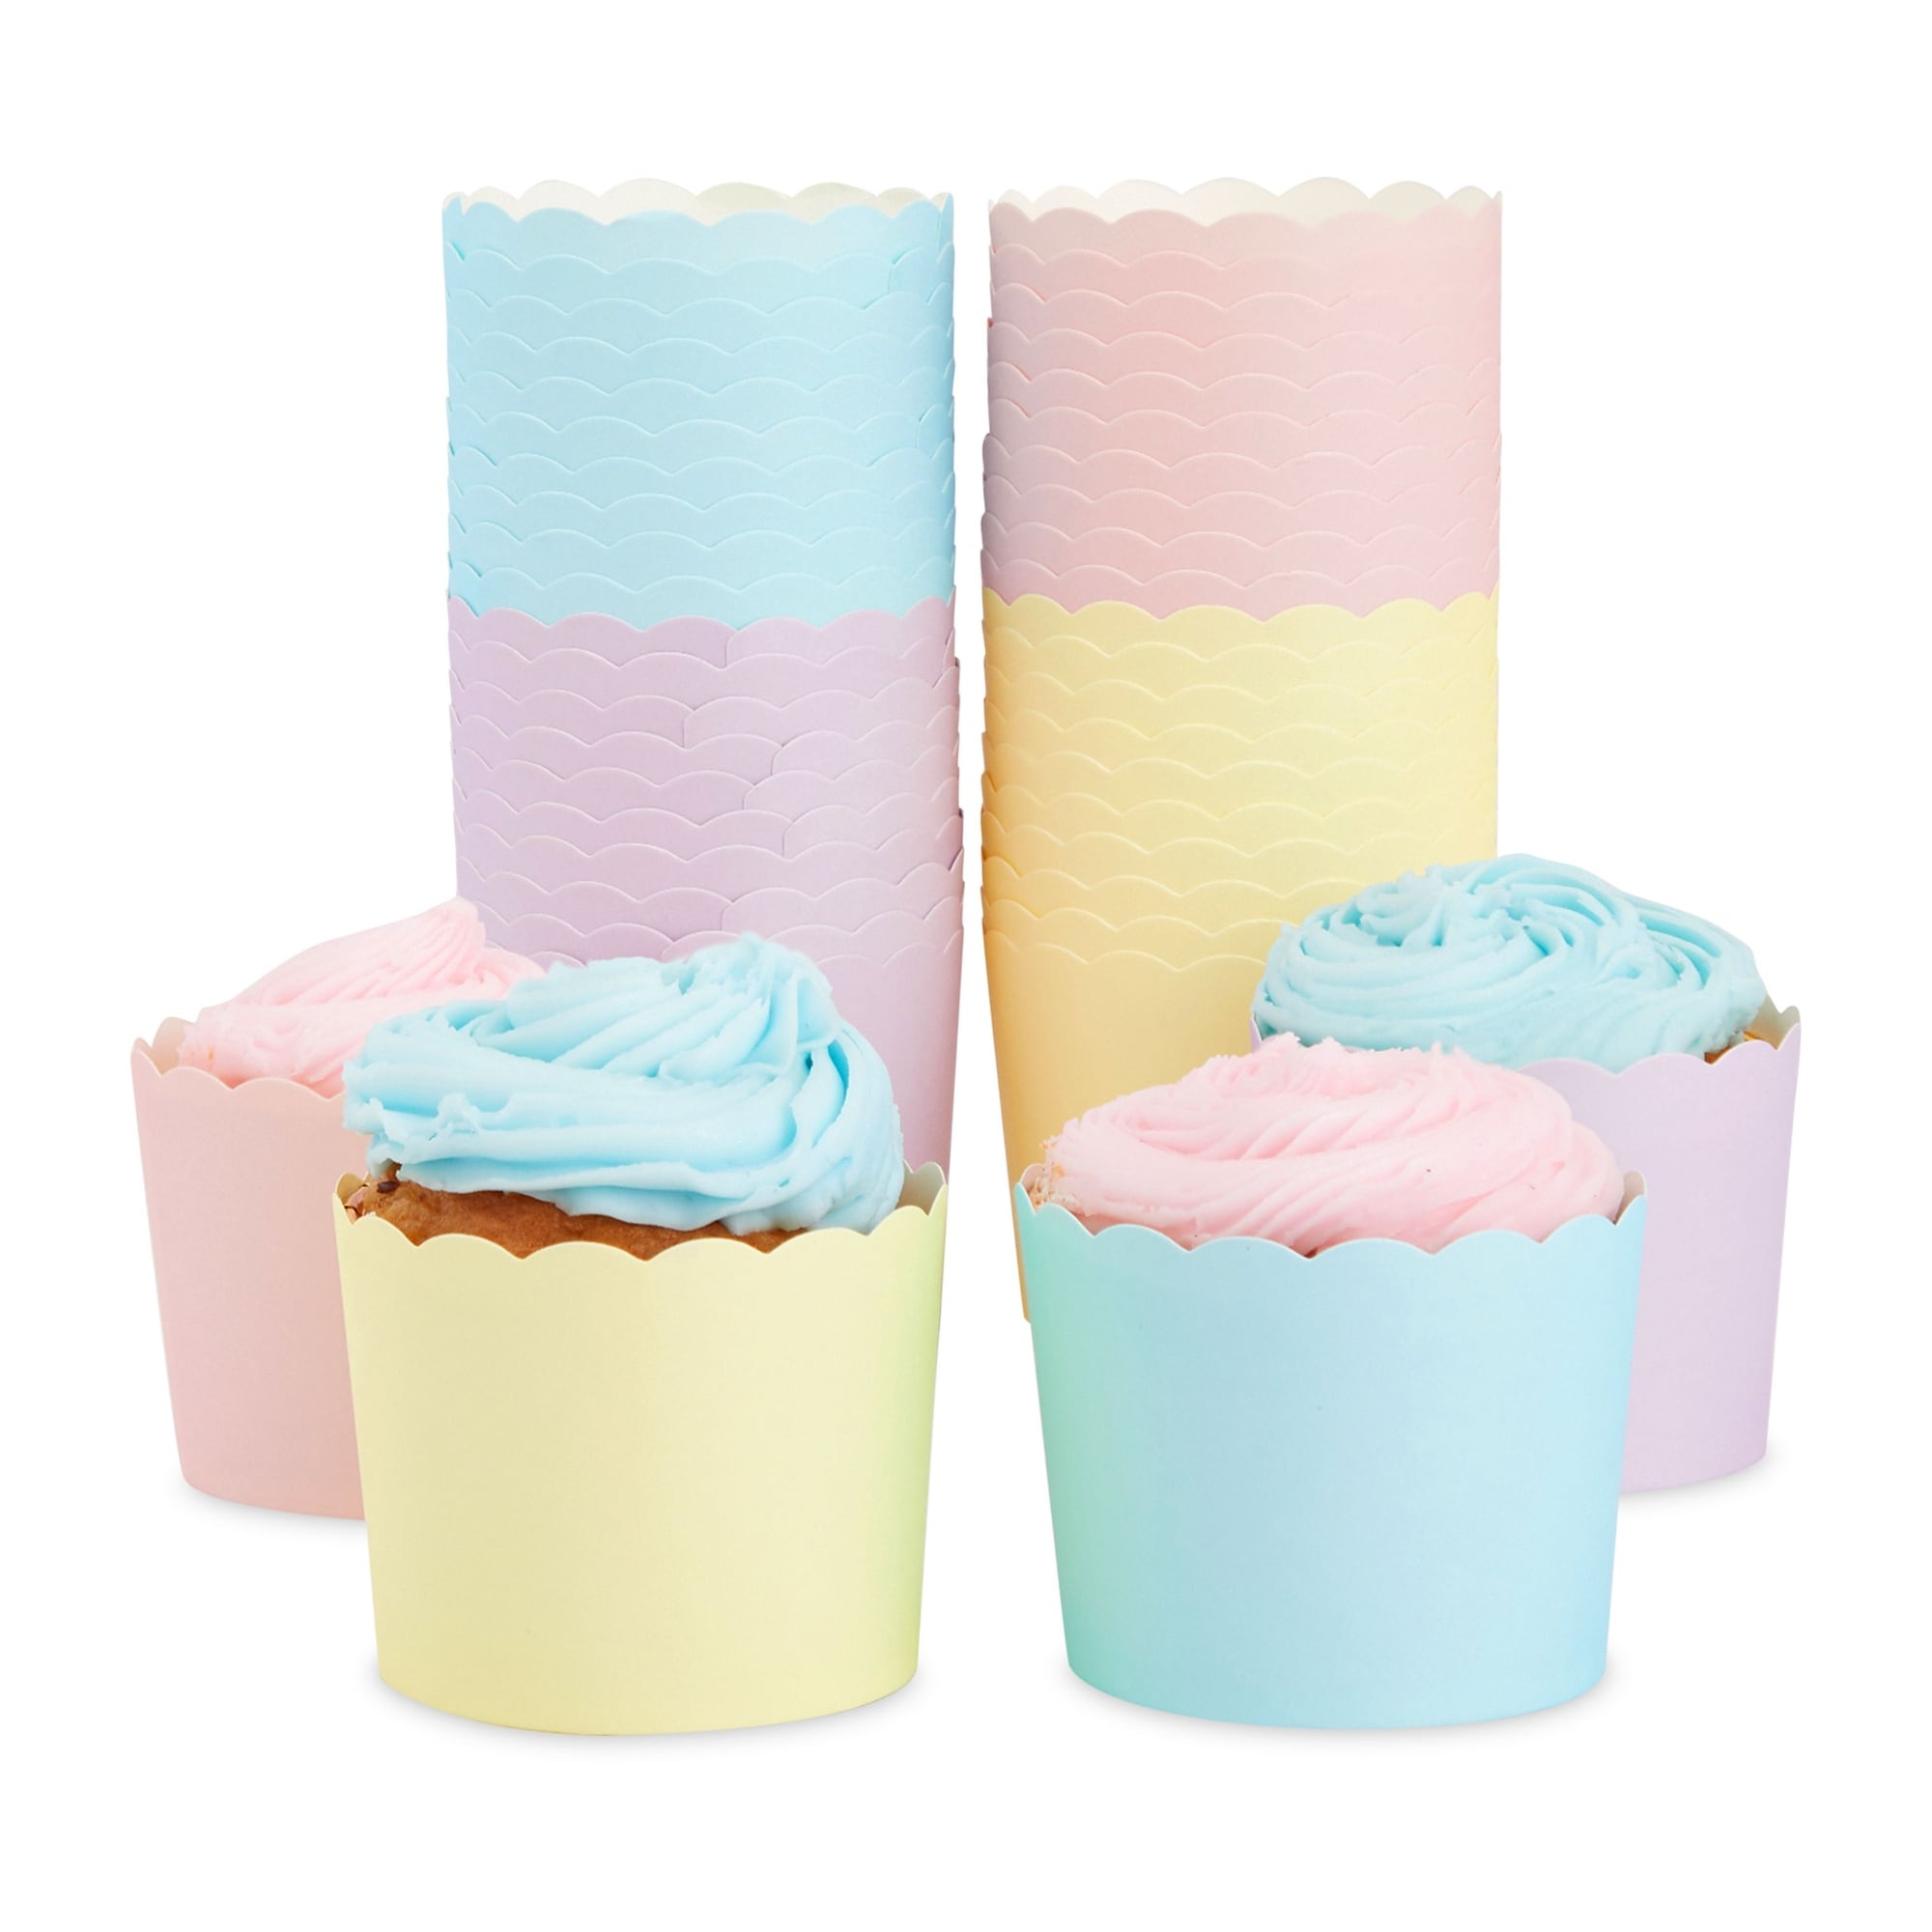 https://ak1.ostkcdn.com/images/products/is/images/direct/ad8820dcbd51aabb7645f10e974fdea0d4000cfb/48-Pack-Pastel-Cupcake-Liners-Wrappers%2C-Rainbow-Color-Muffin-Paper-Baking-Cup-for-Birthday-Party.jpg